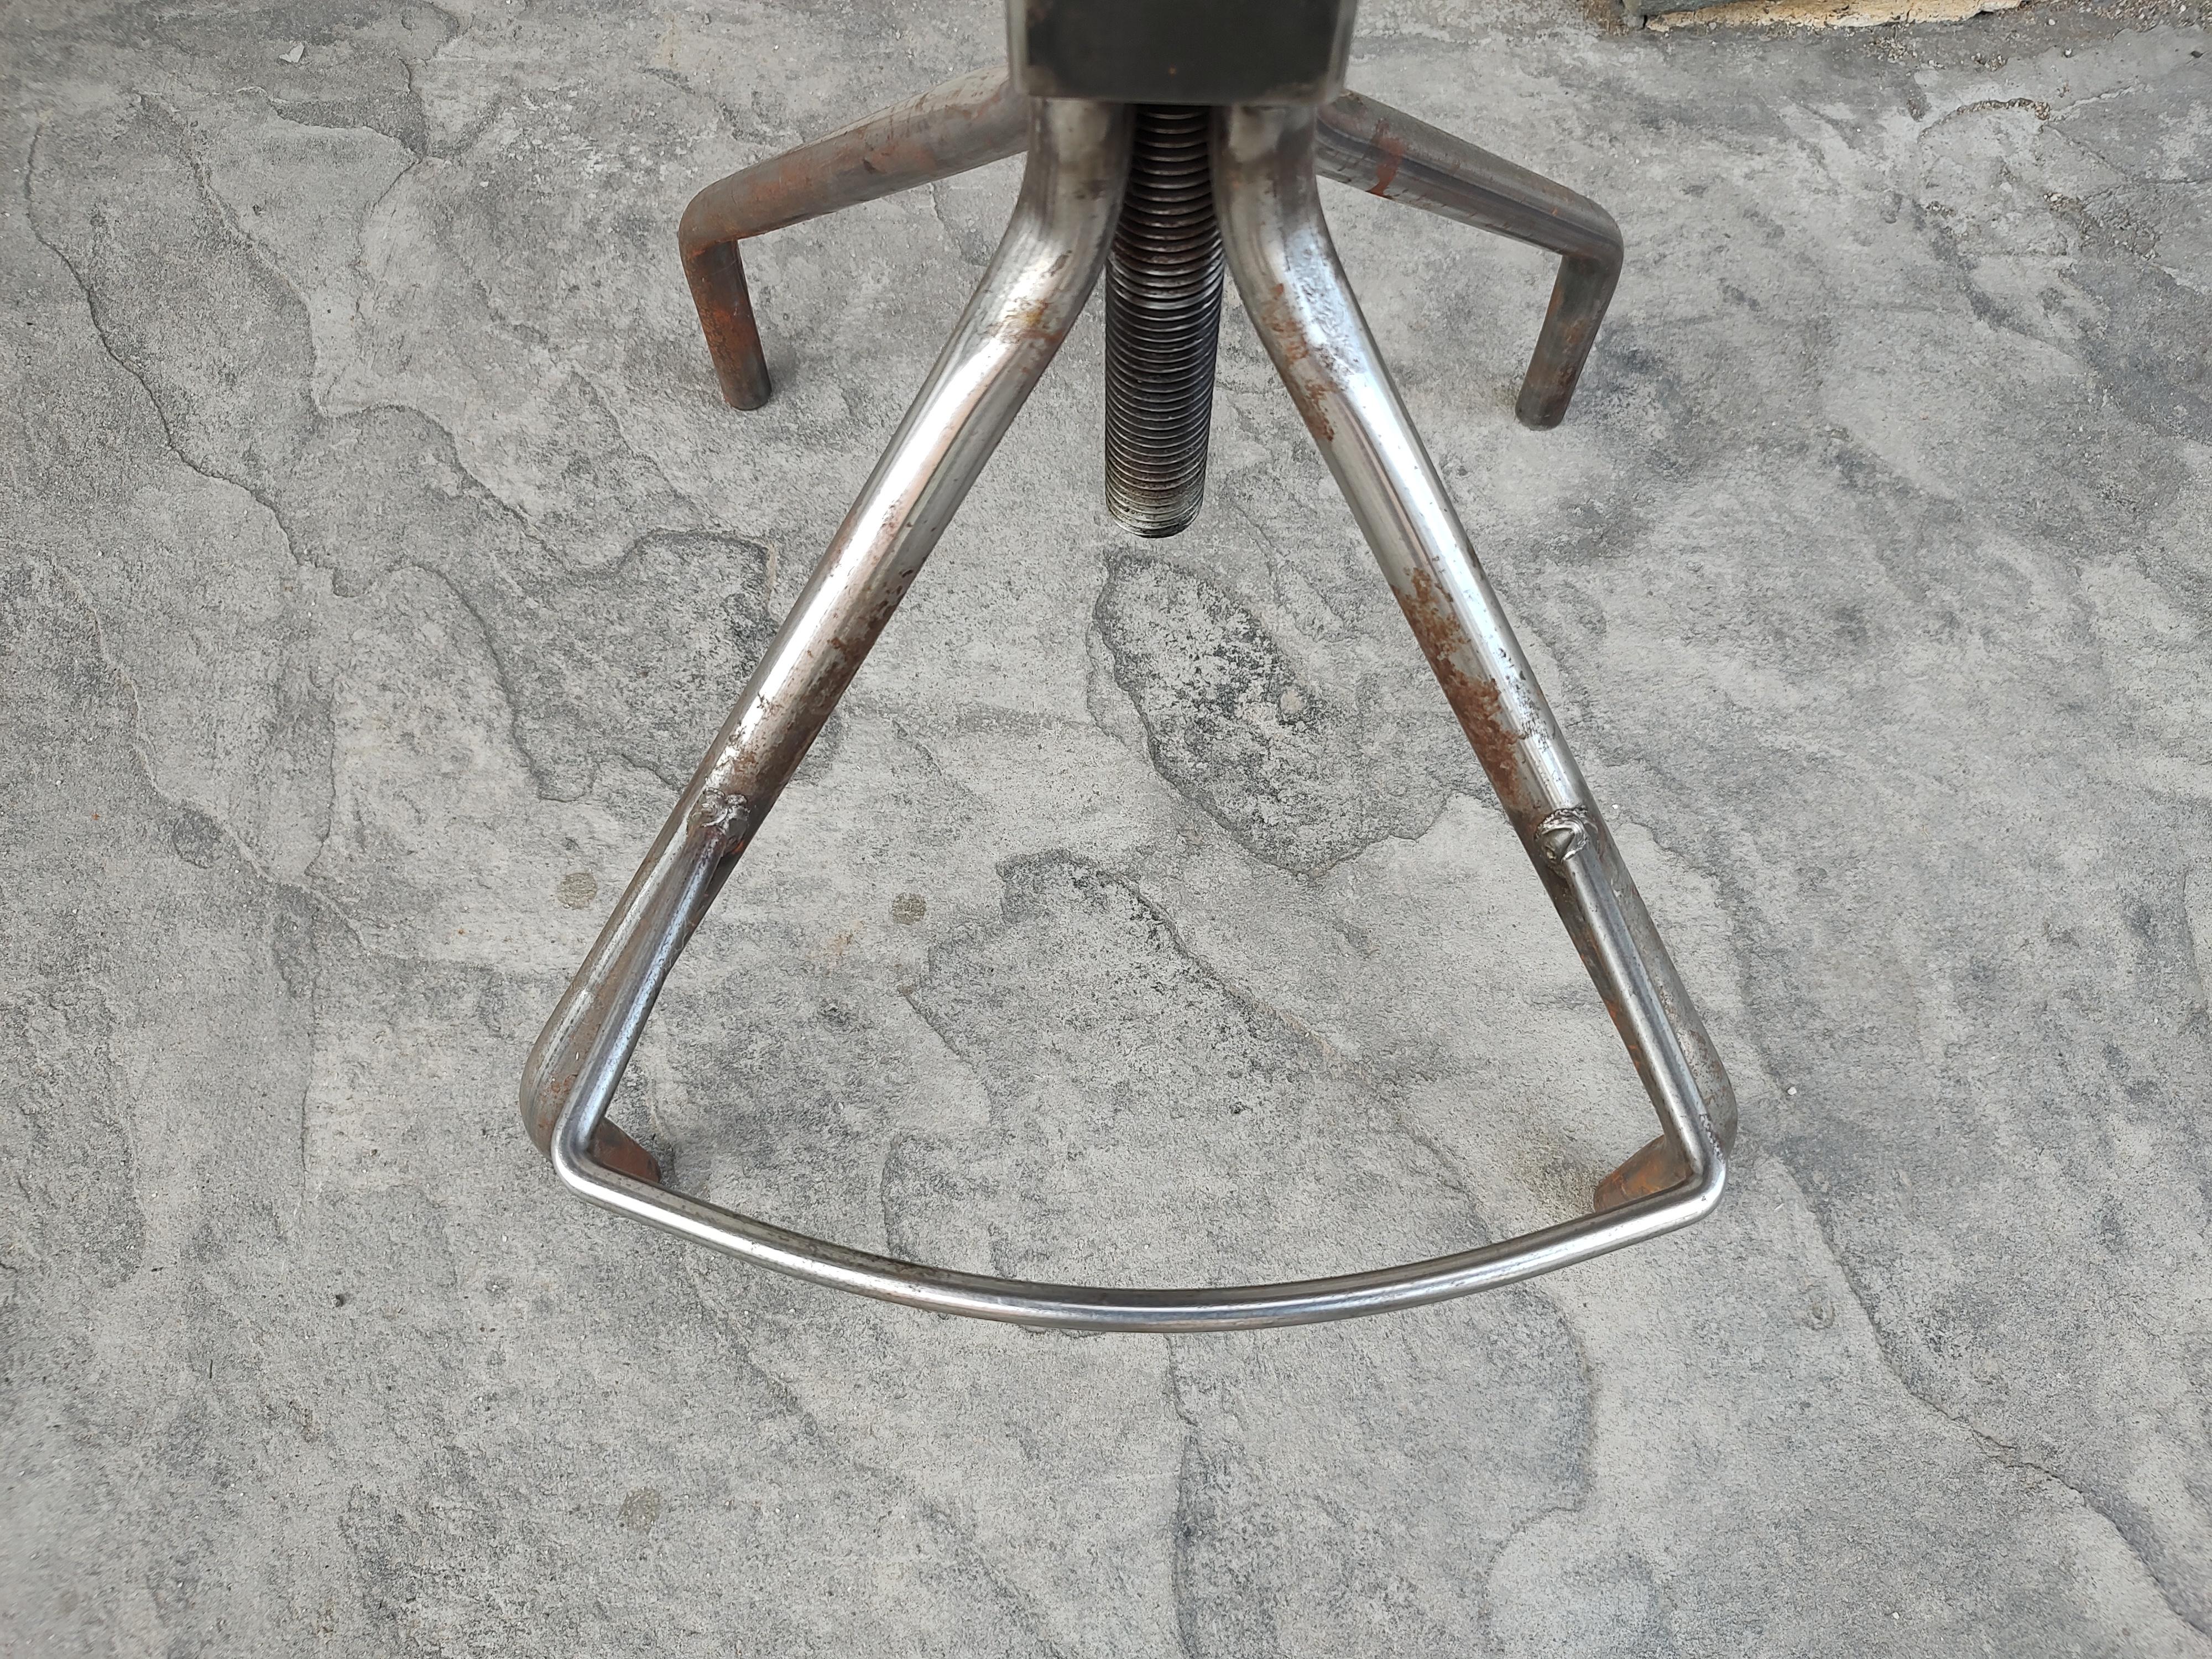 Hand-Crafted Mid-Century Modern Sculptural Adjustable Stool for Work Draftsman